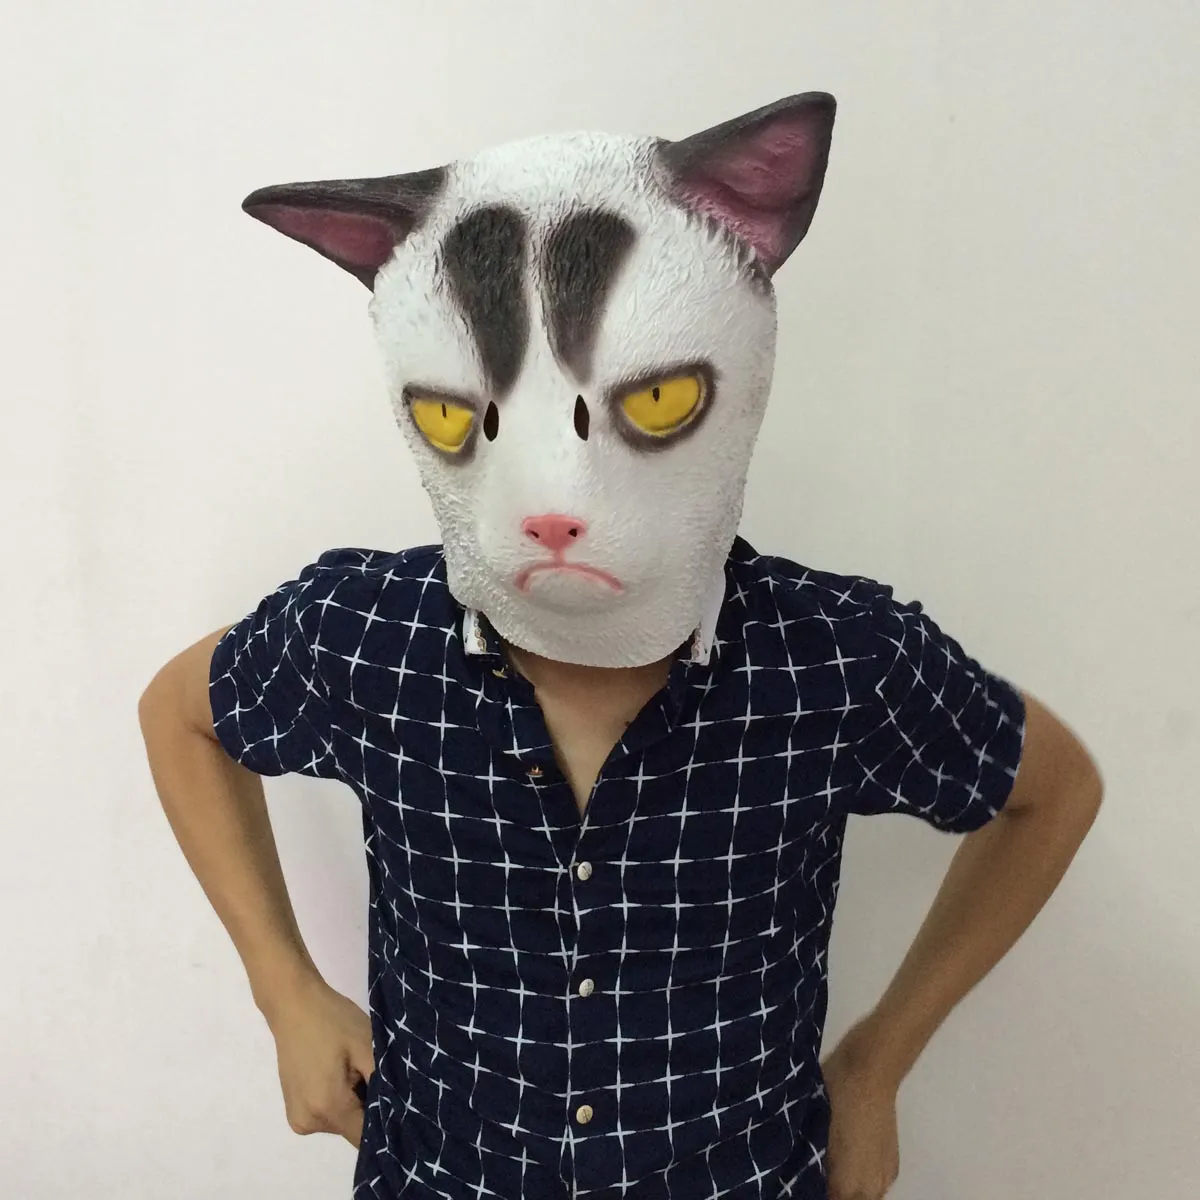 Creepy White Cat Mask Cosplay Angry Cat Mask Halloween Party Masks